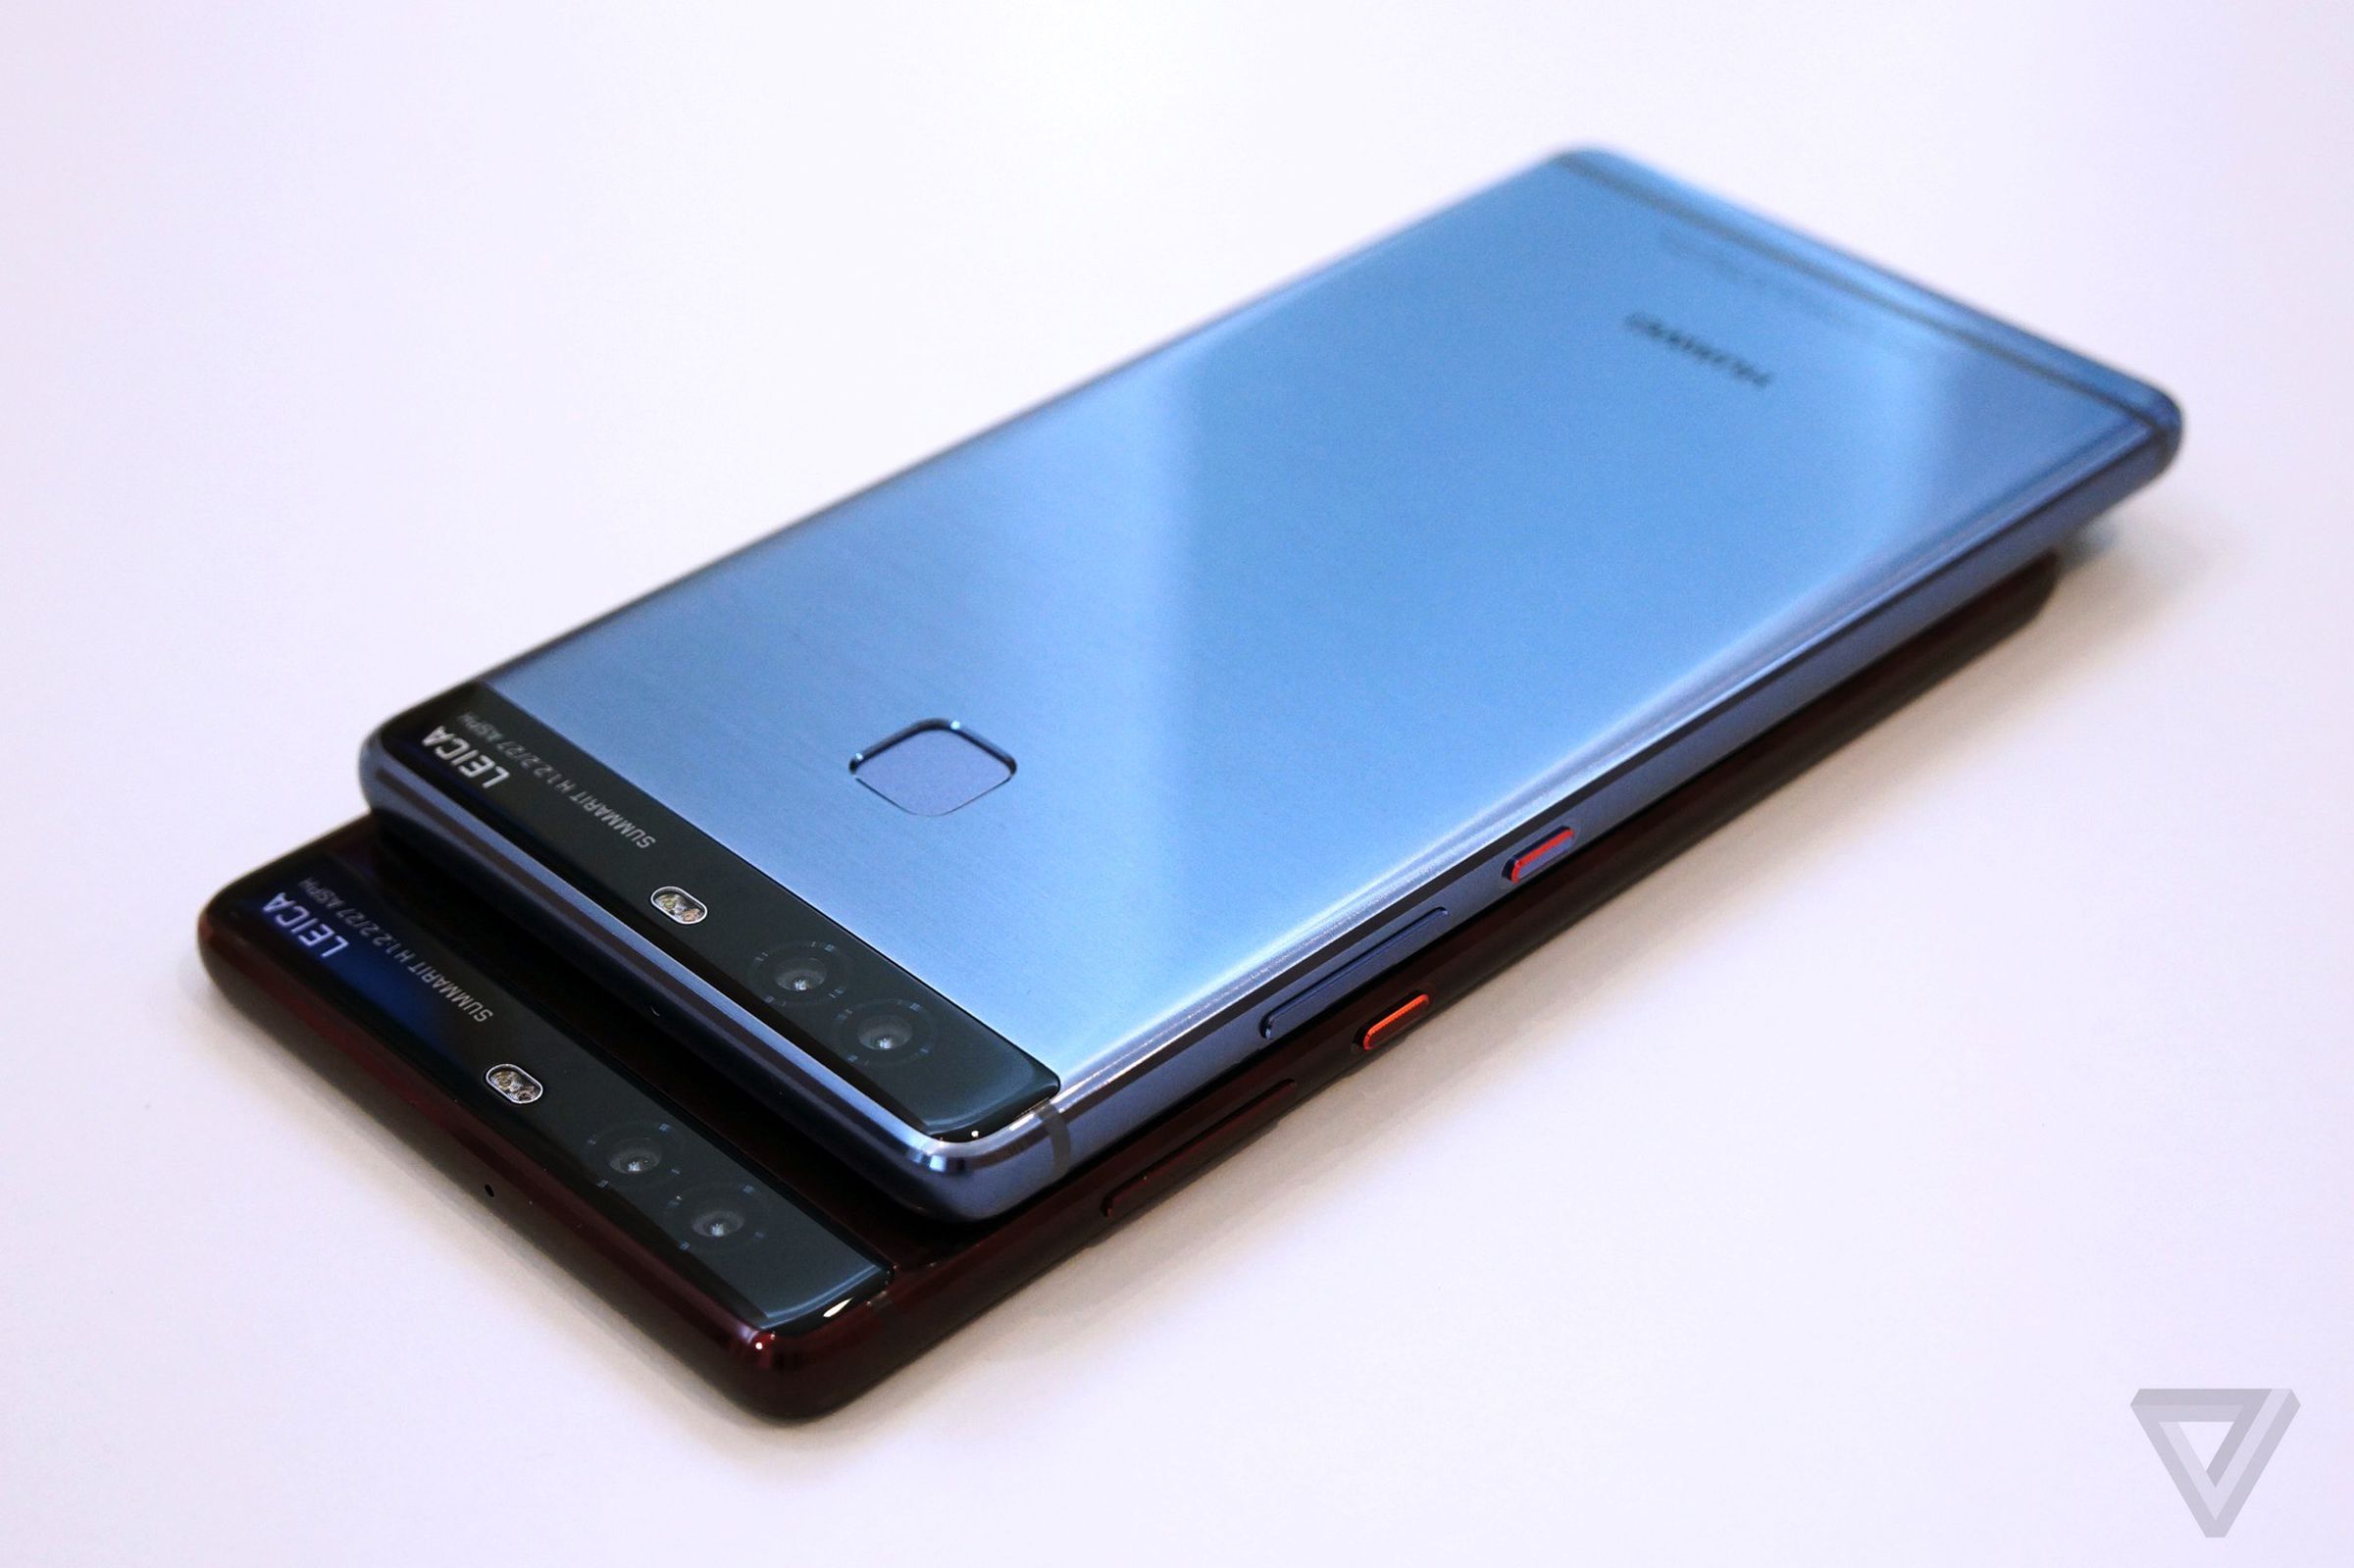 Huawei P9 in red and blue